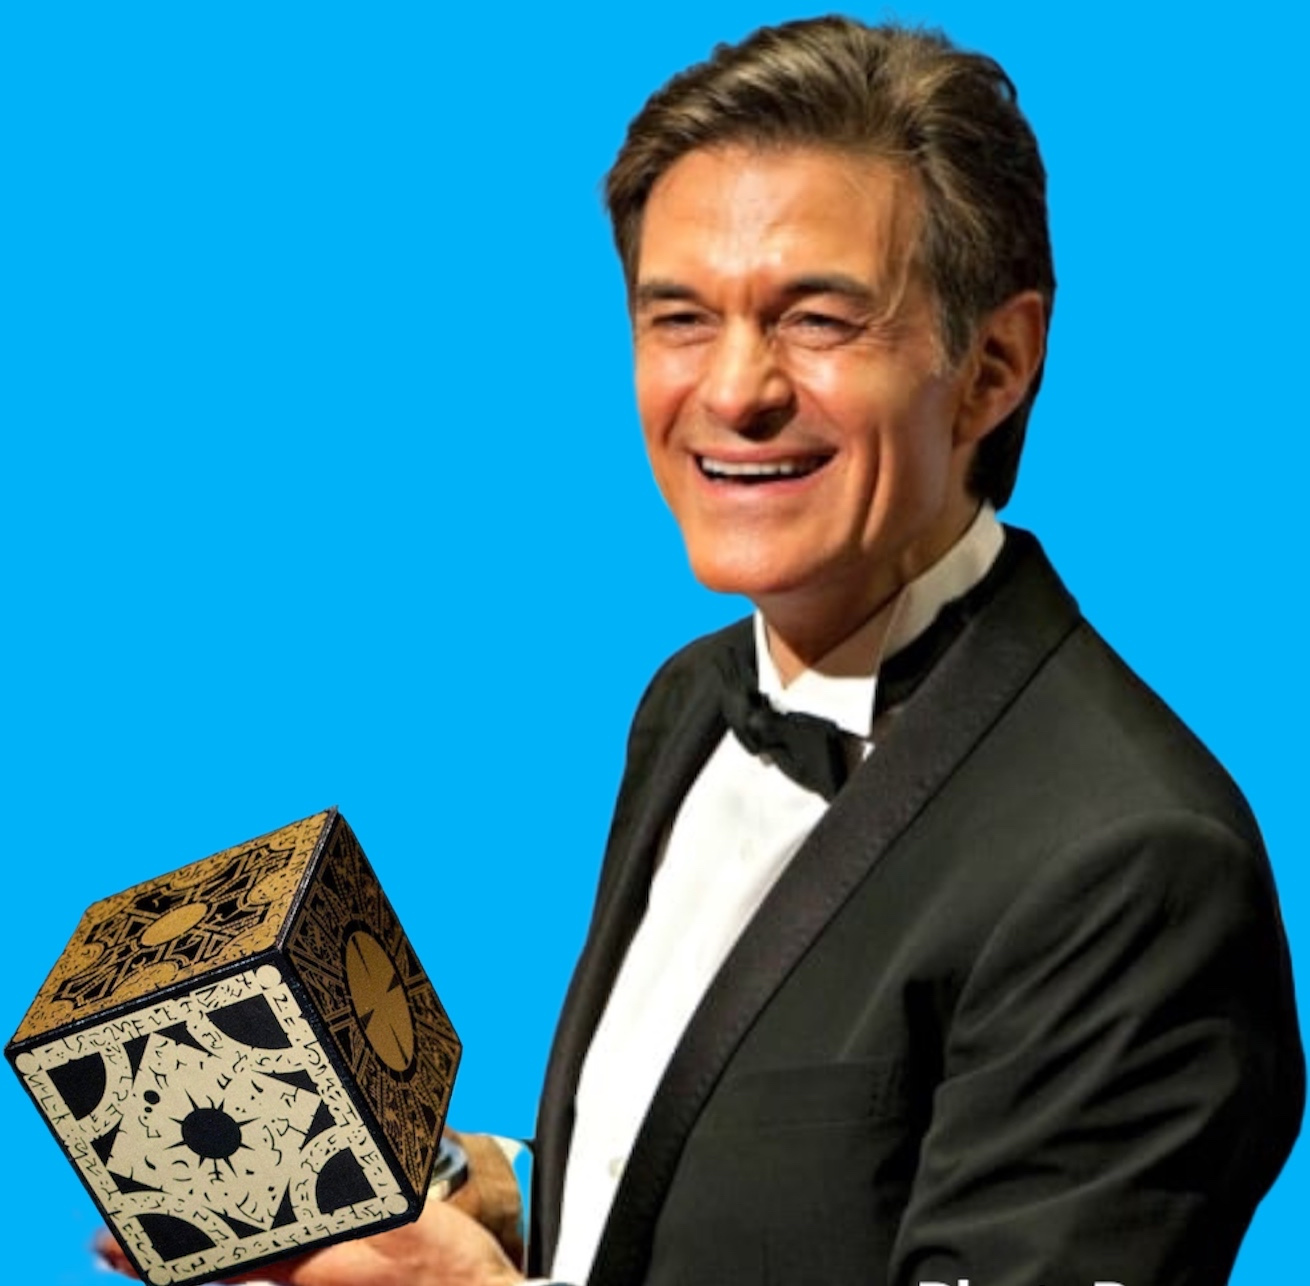 Dr. Oz Gives Campaign Speech Holding Hellraiser Puzzle Box